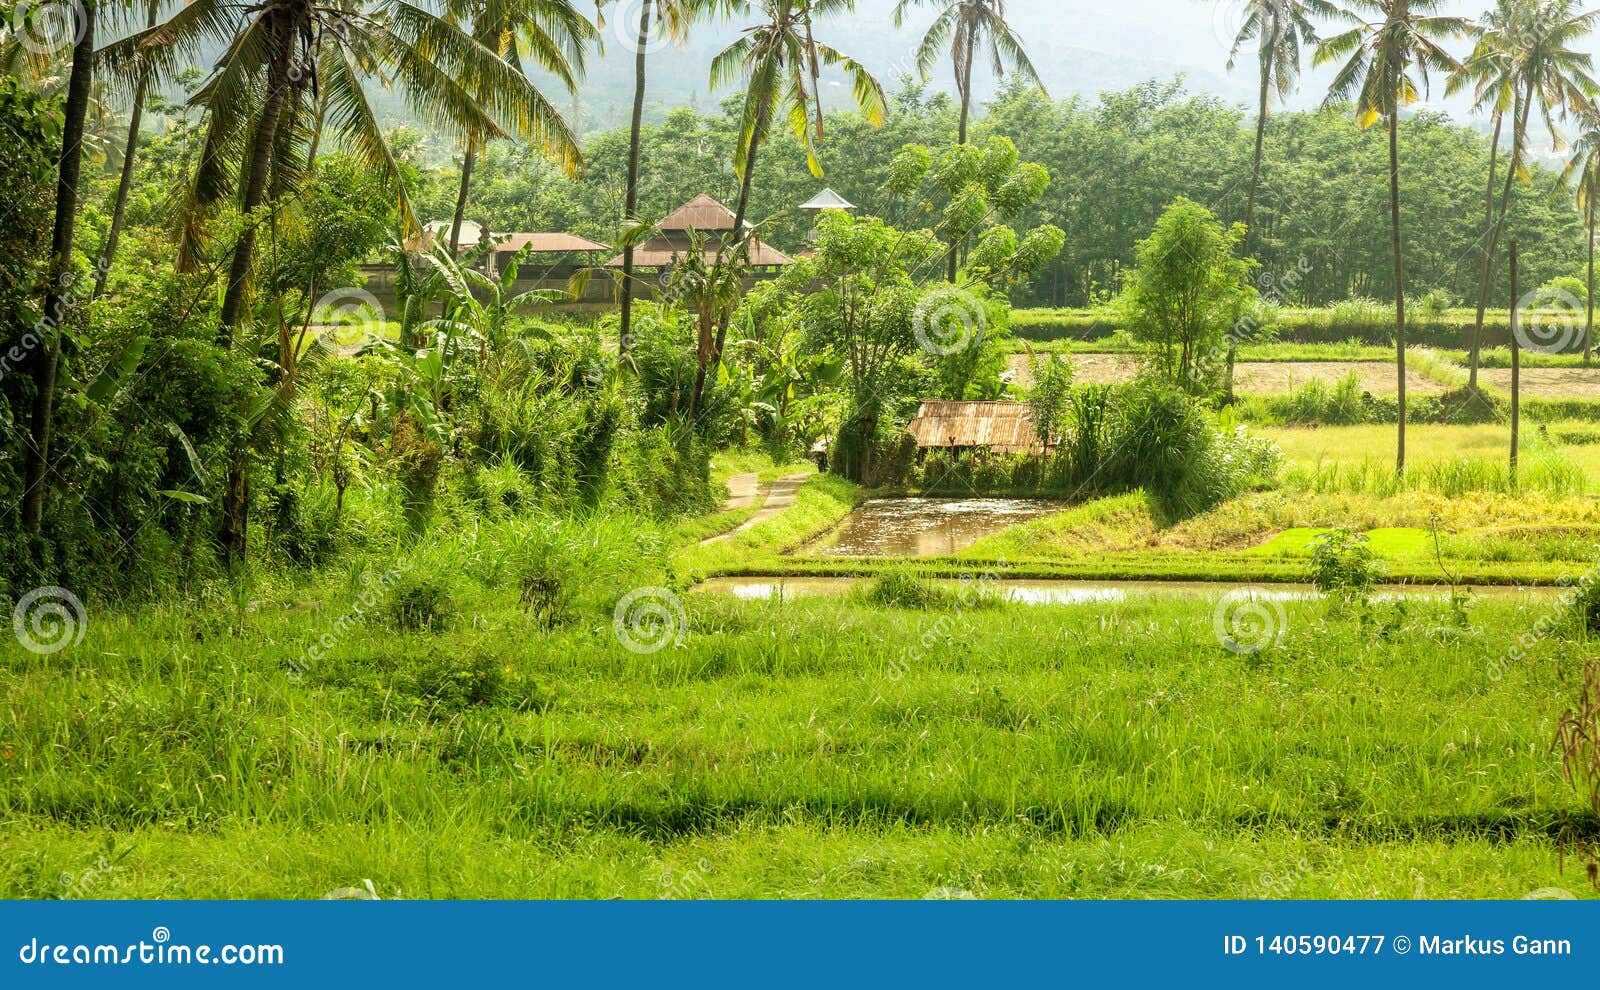 bali landscape with verdant green rice field